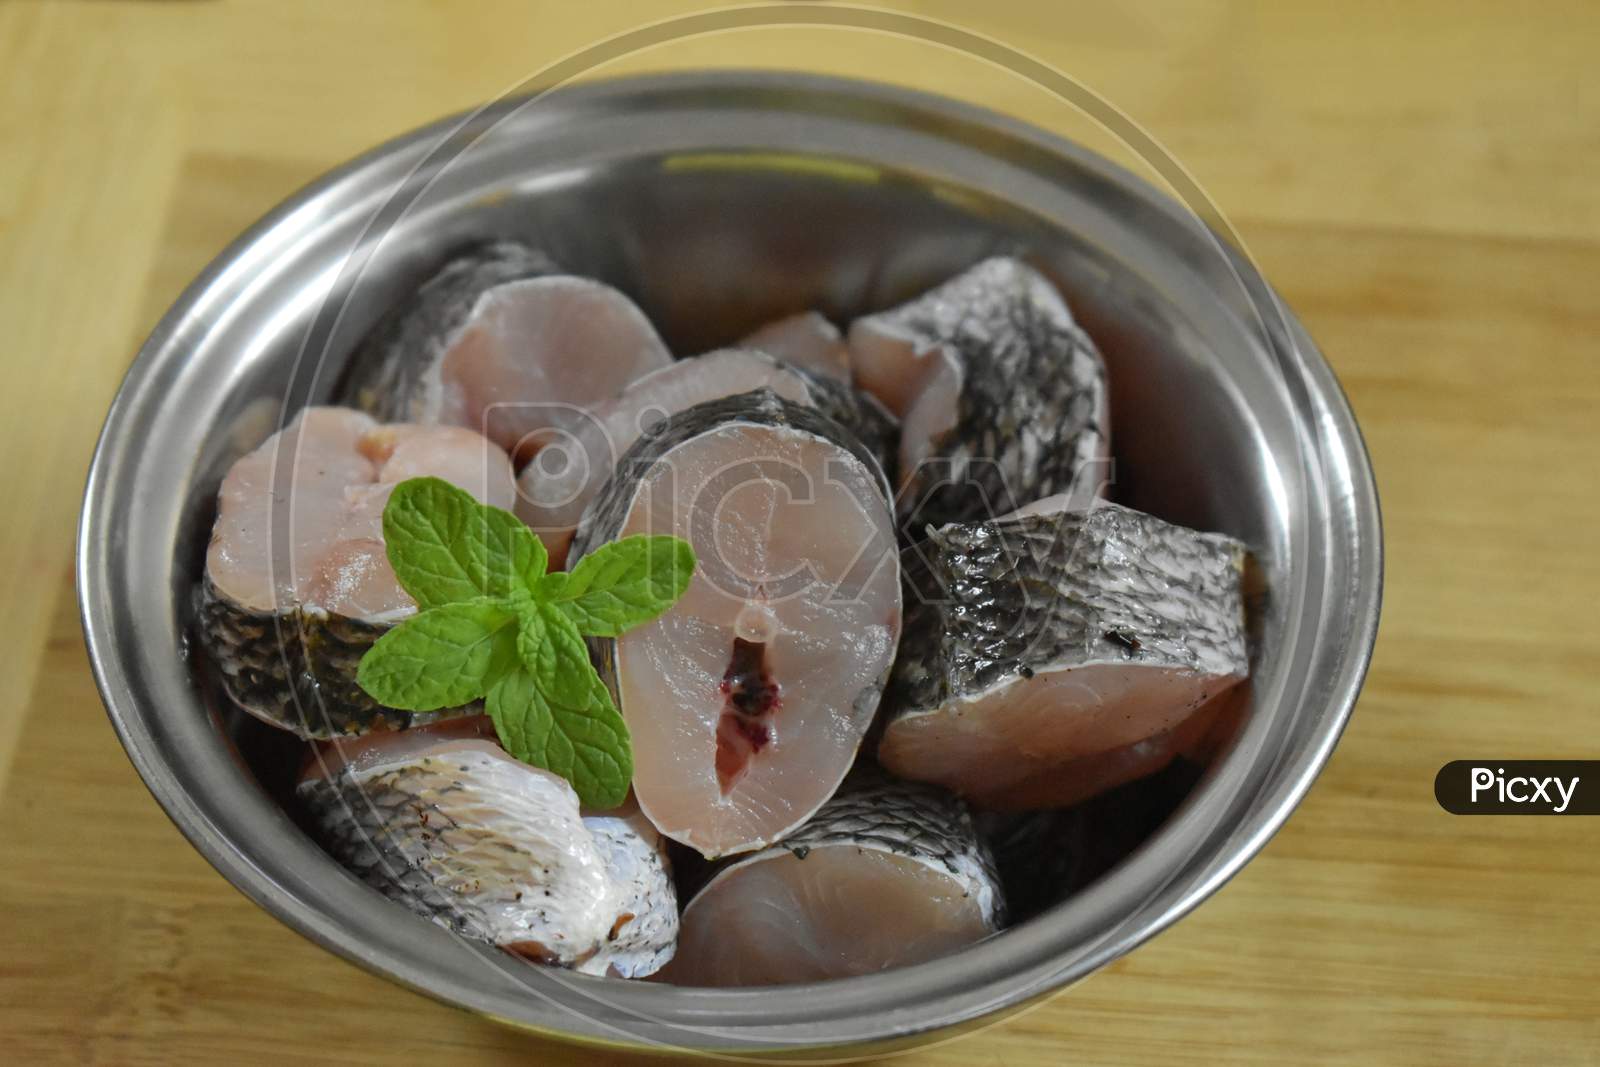 Raw Fish Fillet Of Tilapia On A Cutting Board With Lemon And Spices On A Steel Bowl. Cutting Board With Copy Space, India.